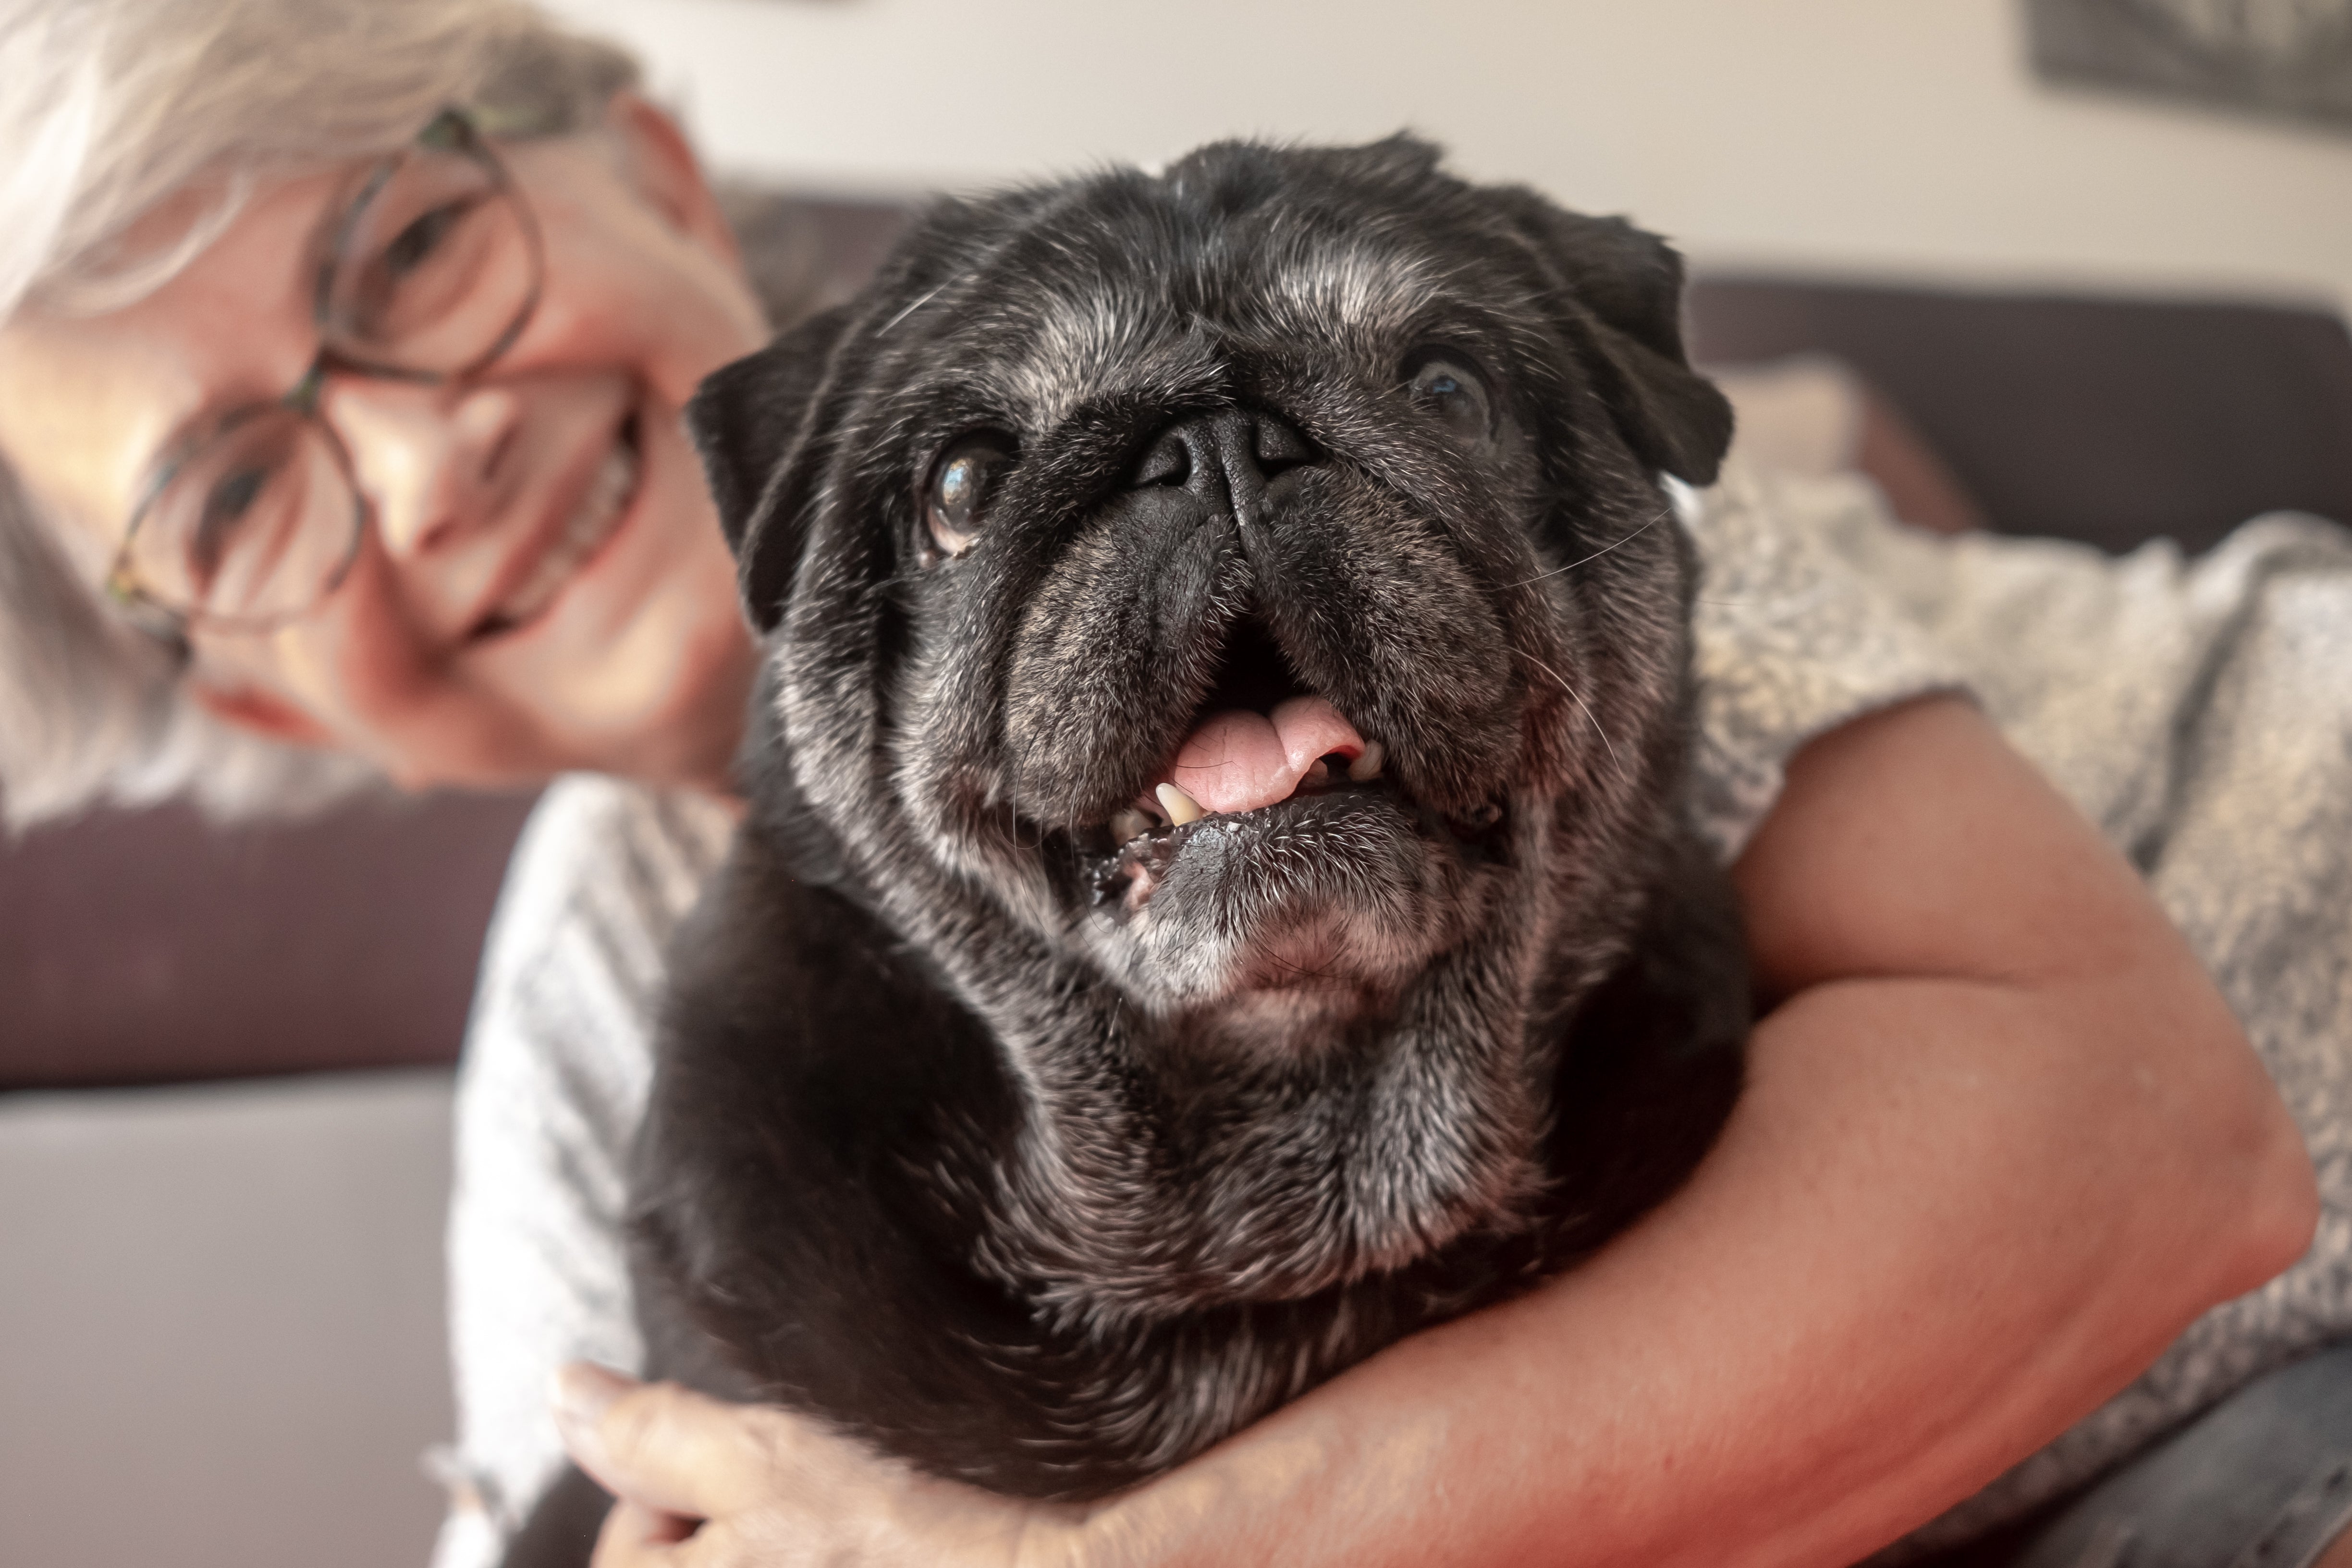 Senior dog, pug, with its senior owner. They are smiling and look directly at the camera. Dog has grey hair.